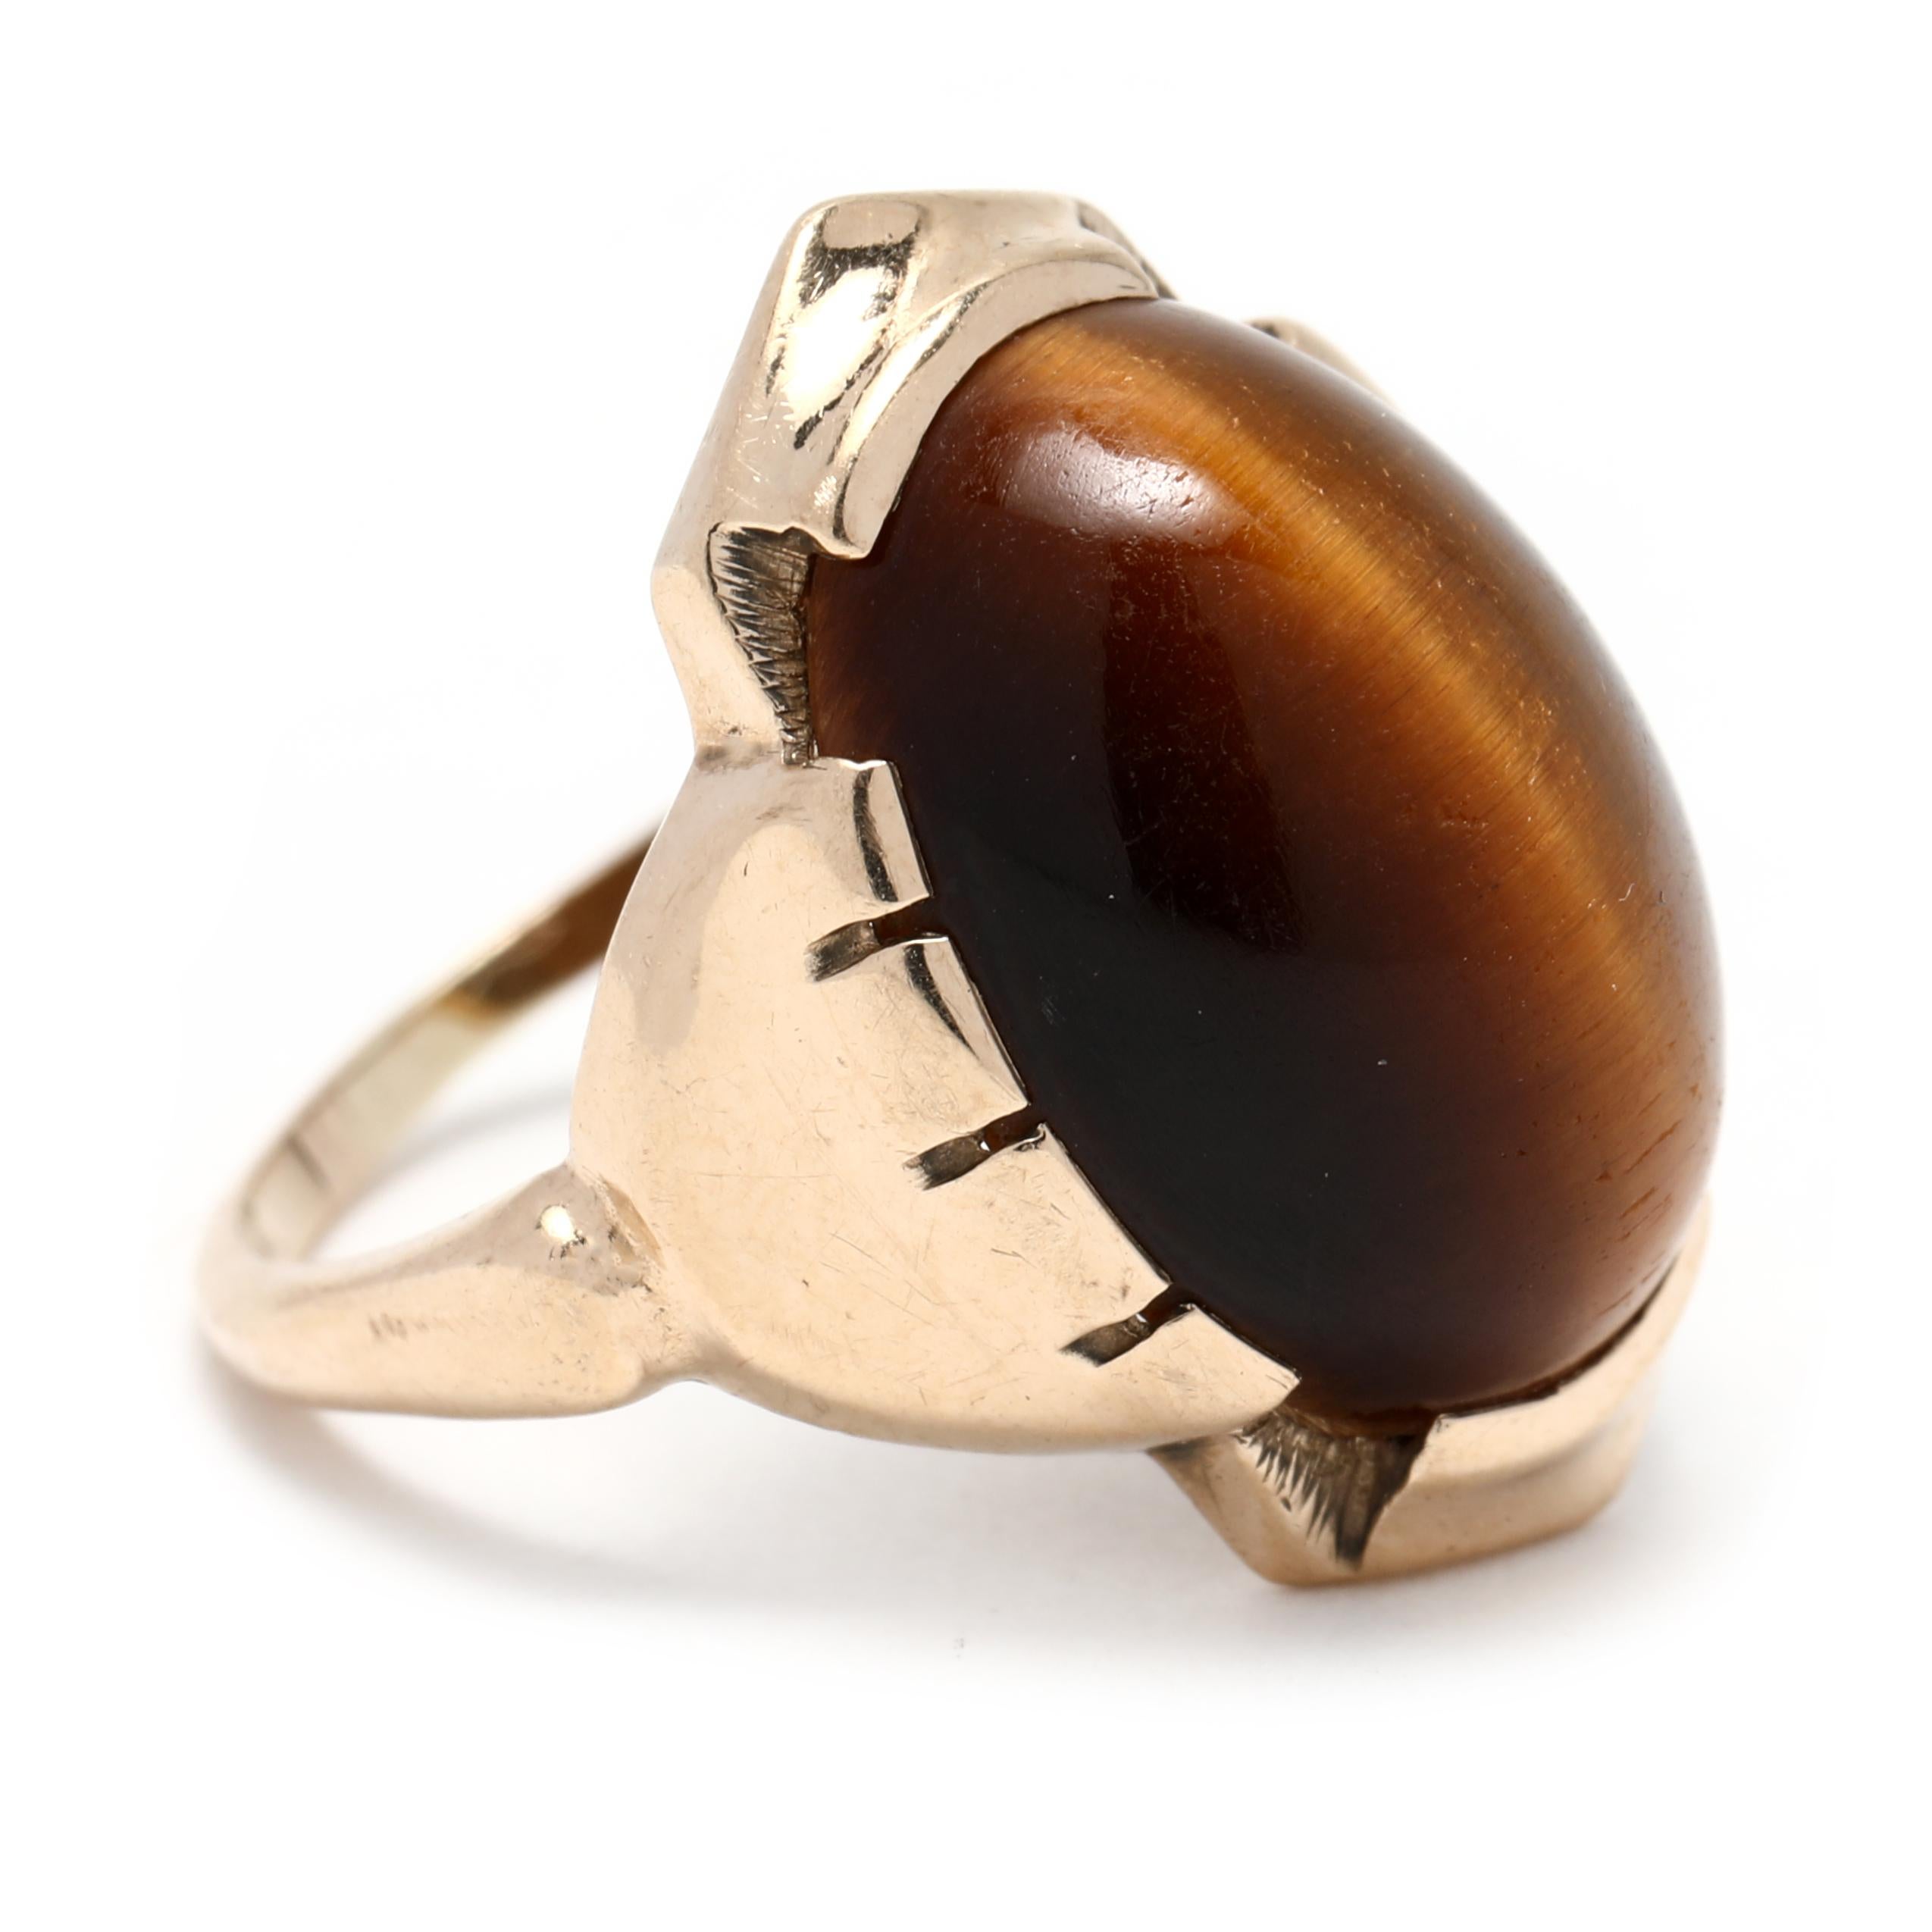 This stunning vintage circa 1930's 10K yellow gold tiger's eye cabochon signet ring is a stunning piece of jewelry. Featuring an oval cabochon tiger's eye stone set in a classic yellow gold band, this stunning piece is sure to turn heads and bring a